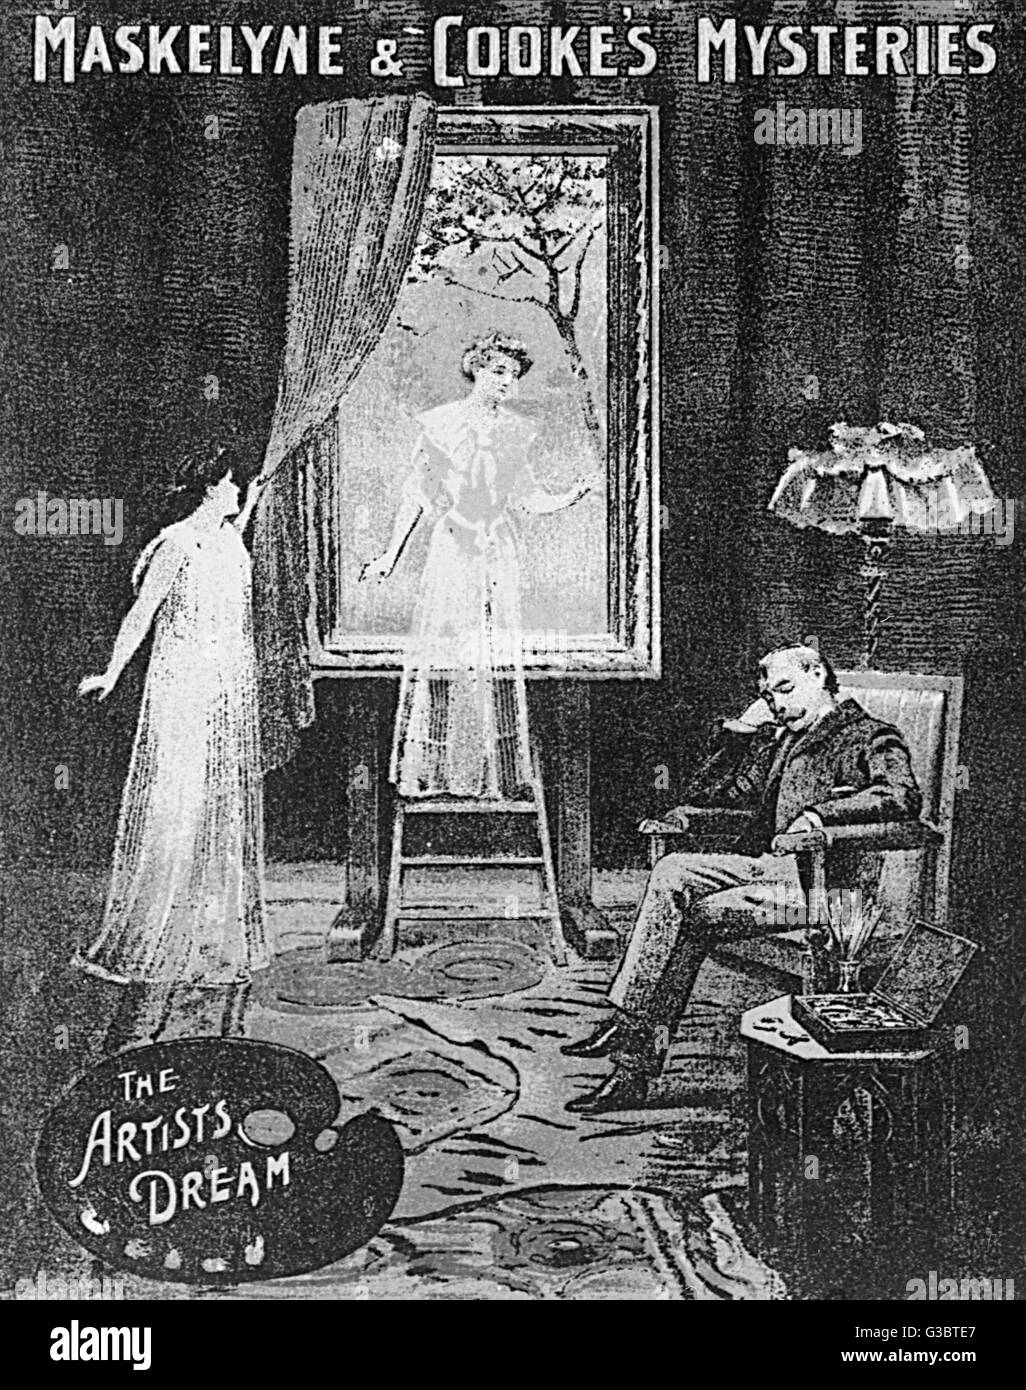 Poster for The Artist's Dream, one of Maskelyne &amp; Cooke's Mysteries, performed on stage.  The artist has painted a portrait of his recently deceased wife.  As he sleeps, his wife steps out of the picture, kisses him, then disappears back into the canv Stock Photo